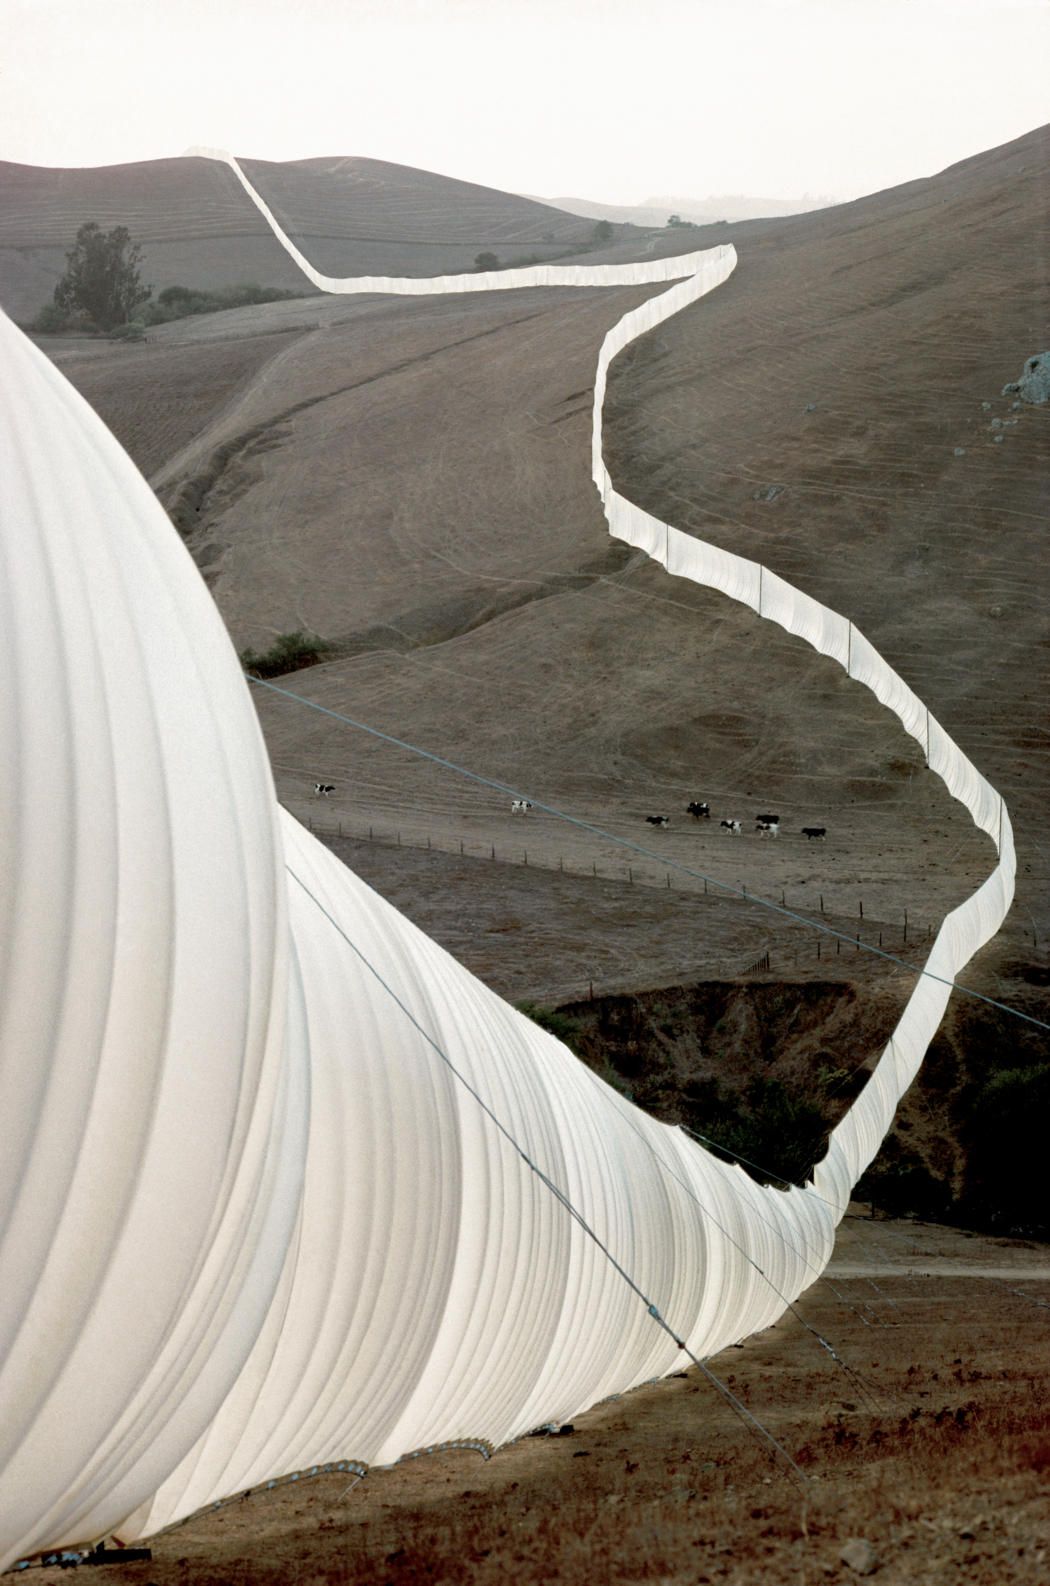 Running Fence, Project for Sonoma and Marin Counties, Christo